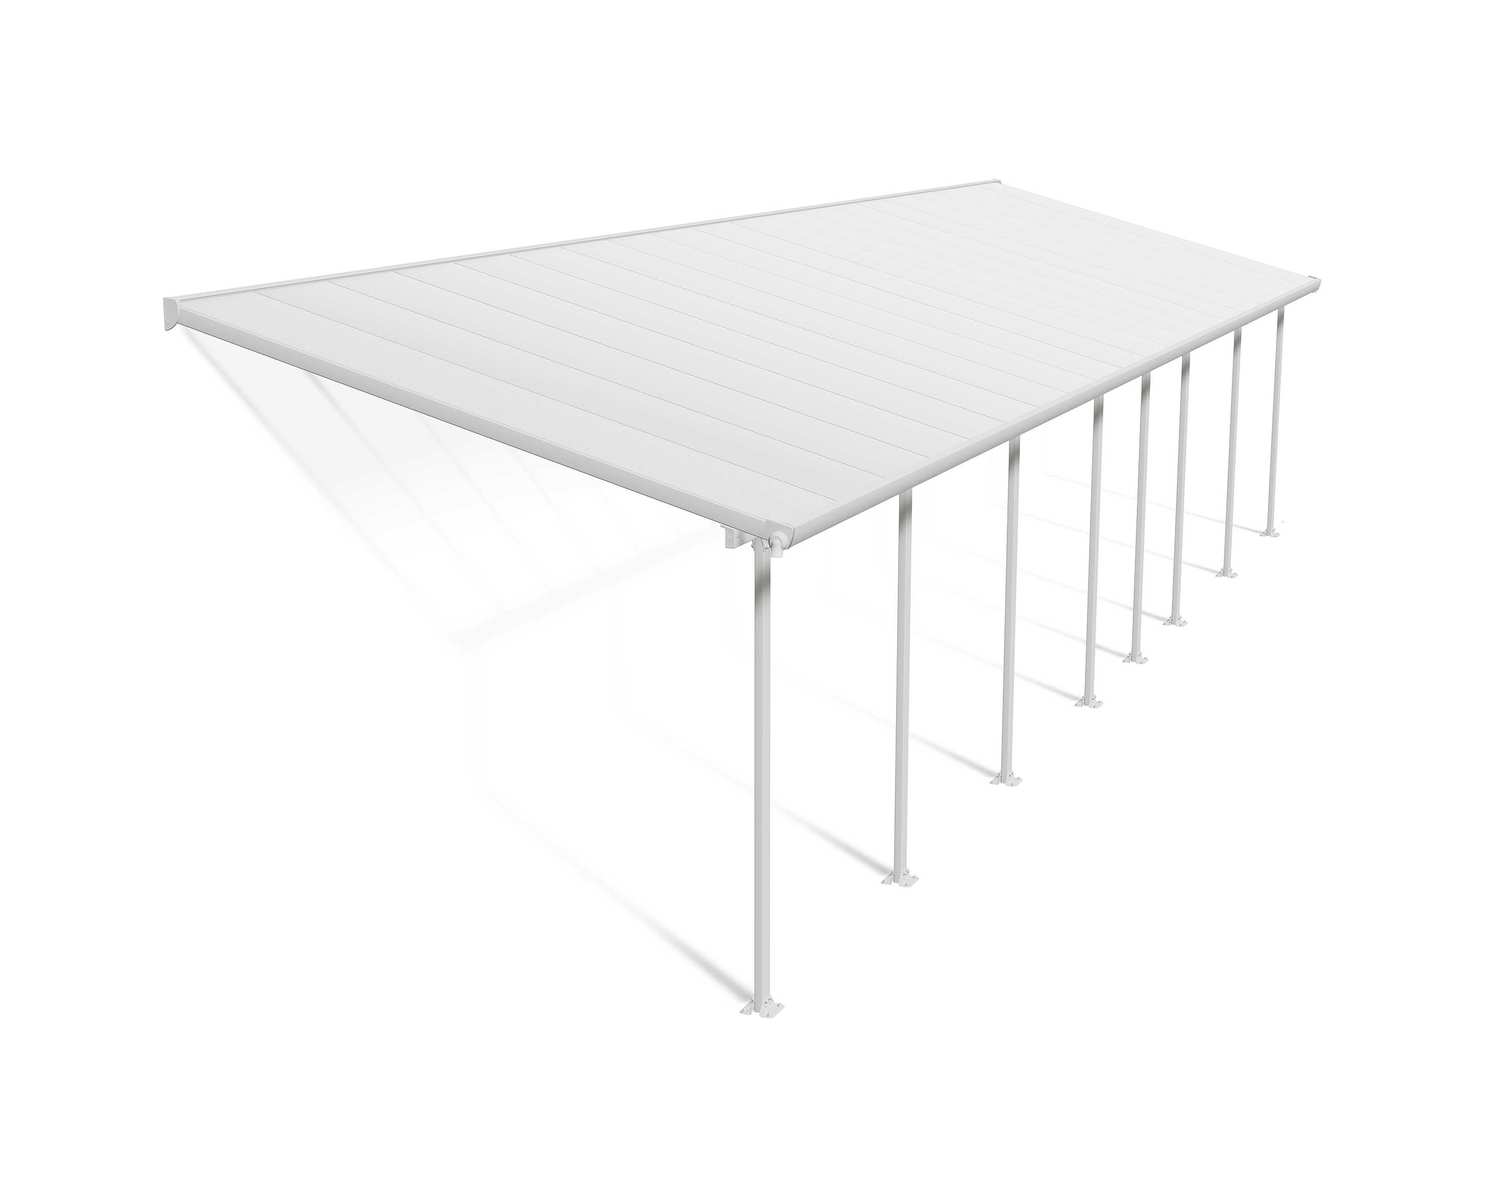 Feria 10 ft. x 40 ft. White Aluminium Patio Cover With 8 Posts, White Twin-Wall Polycarbonate Roof Panels.